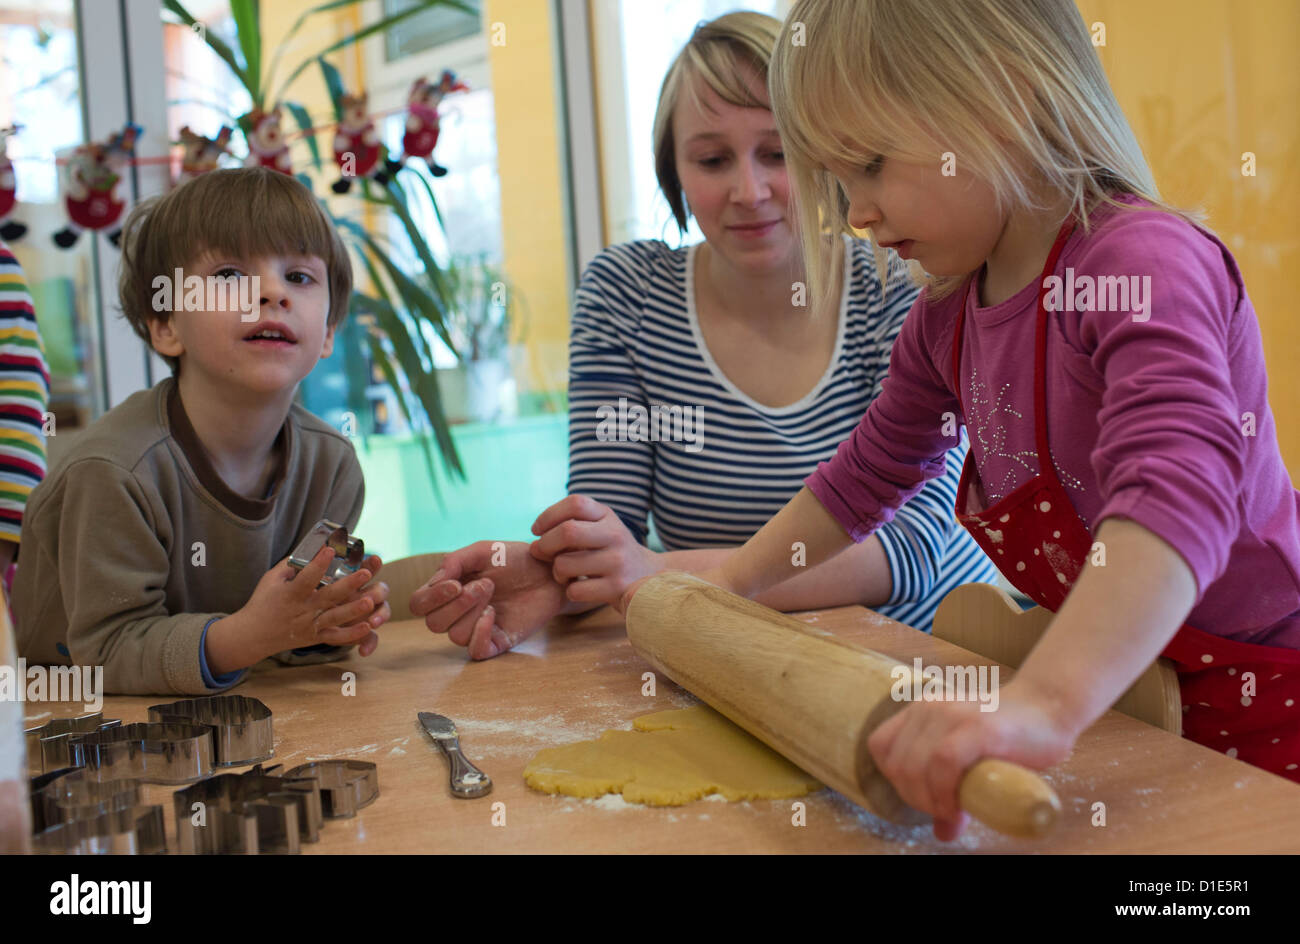 Nursery teacher Nadine Käker bakes Christmas cookies with tCecil (l) and  Ari (r) in the 24-hours-nursery "nidulus" in Schwerin, Germany, 03 December  2012. Since three years, the nursery offers around-the-clock care for